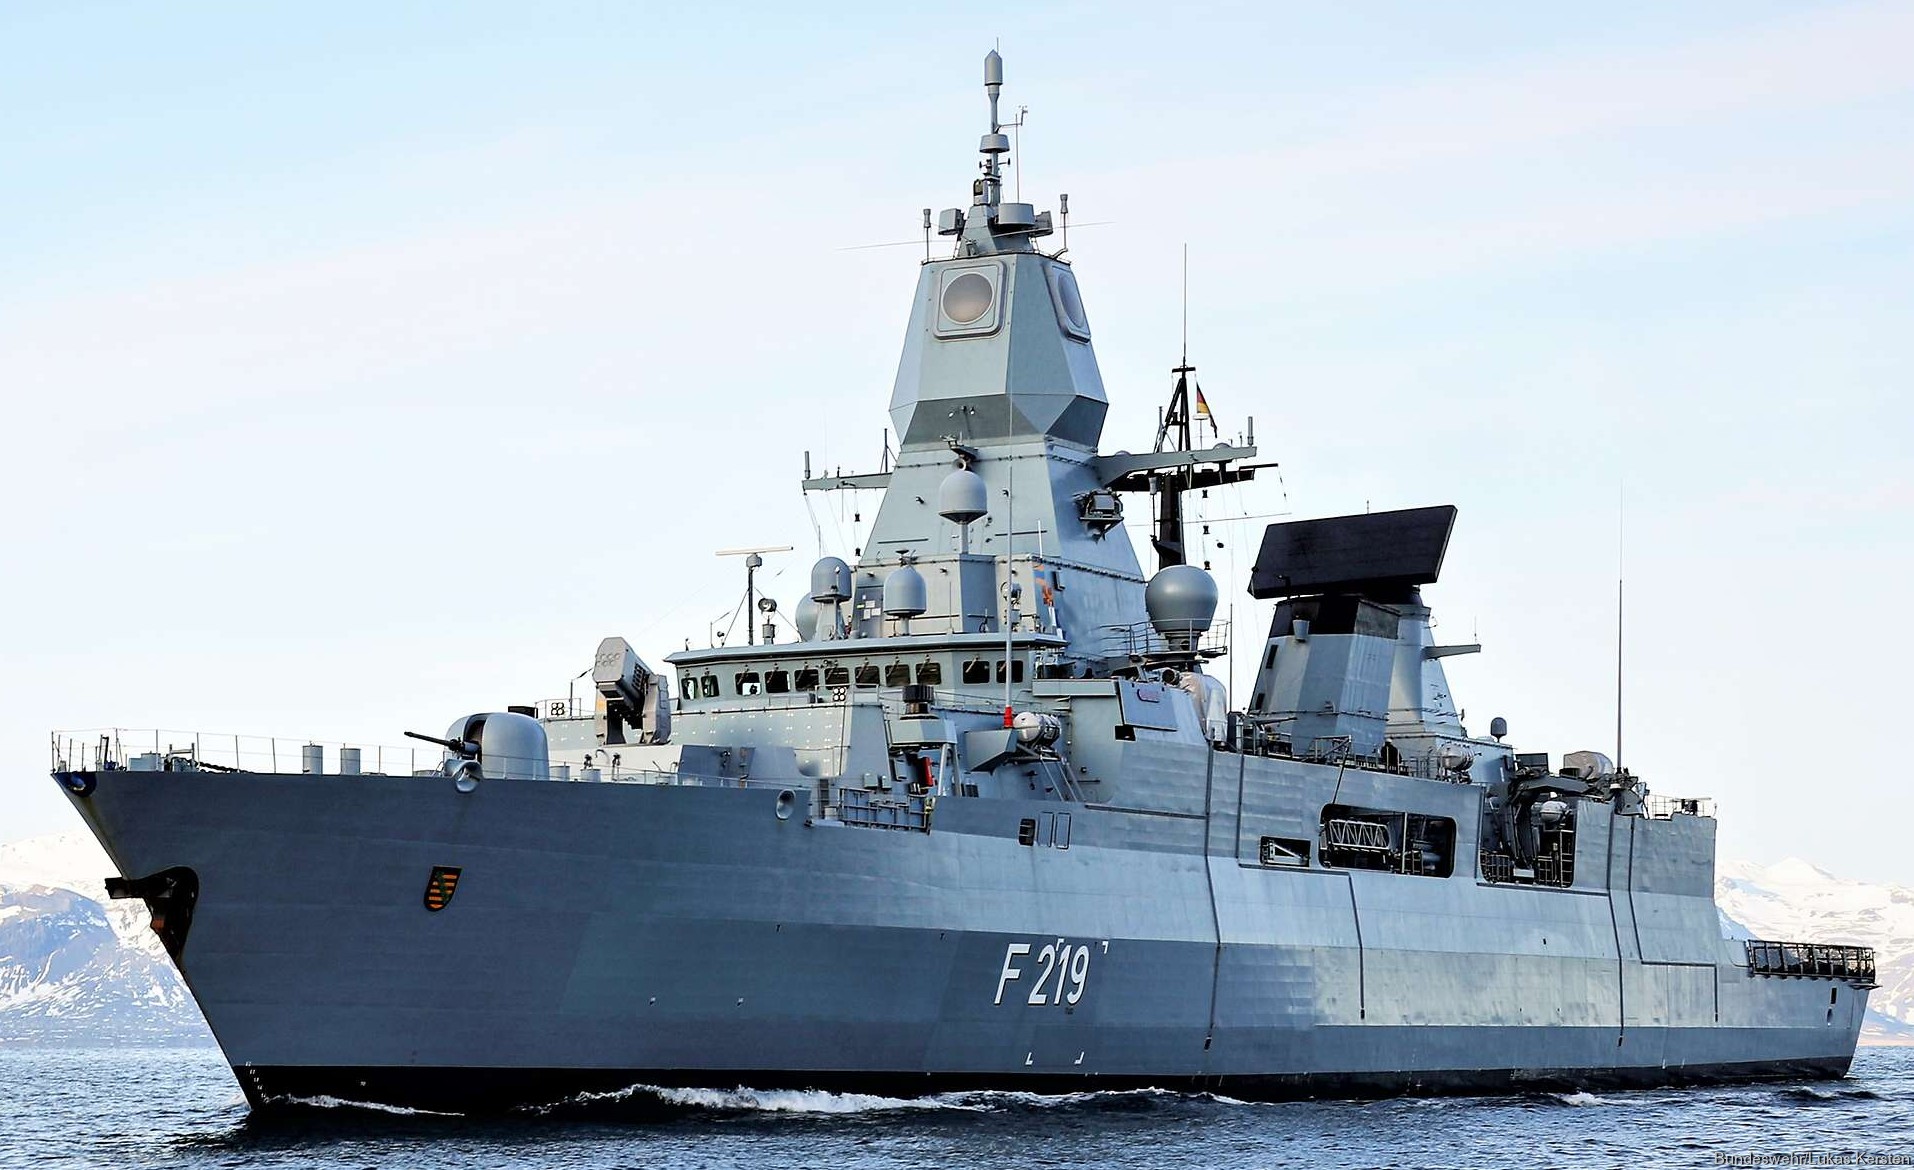 f-219 fgs sachsen type 124 class guided missile frigate ffg german navy marine fregatte 44